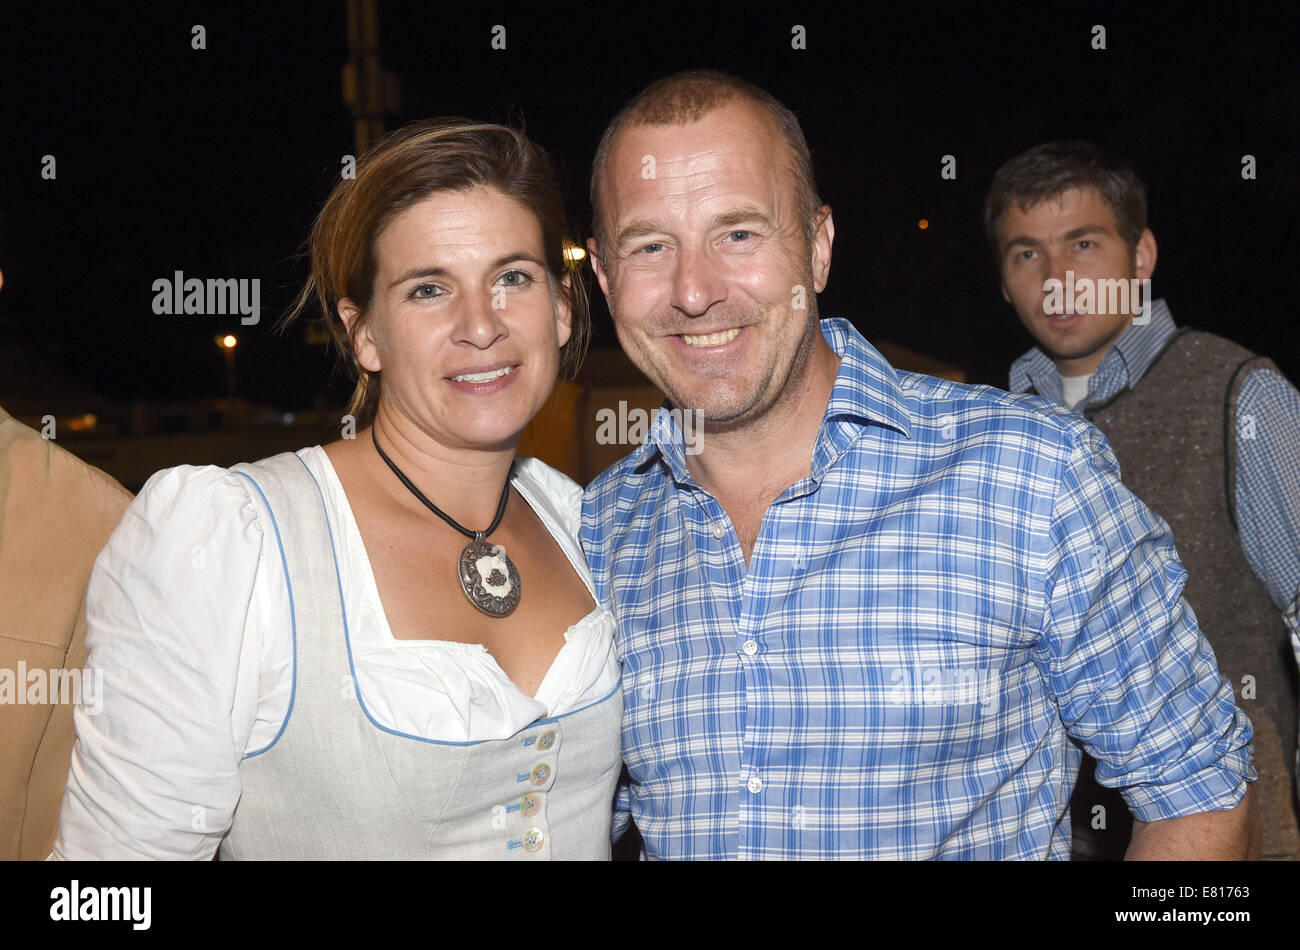 Actor Heino Ferch celebrates with his wife Marie-Jeanette at the 'Kaefer tent' during the Oktoberfest 2014 in Munich (Bavaria), Germany, 27 September 2014. PHOTO: FELIX HOERHAGER/dpa Stock Photo